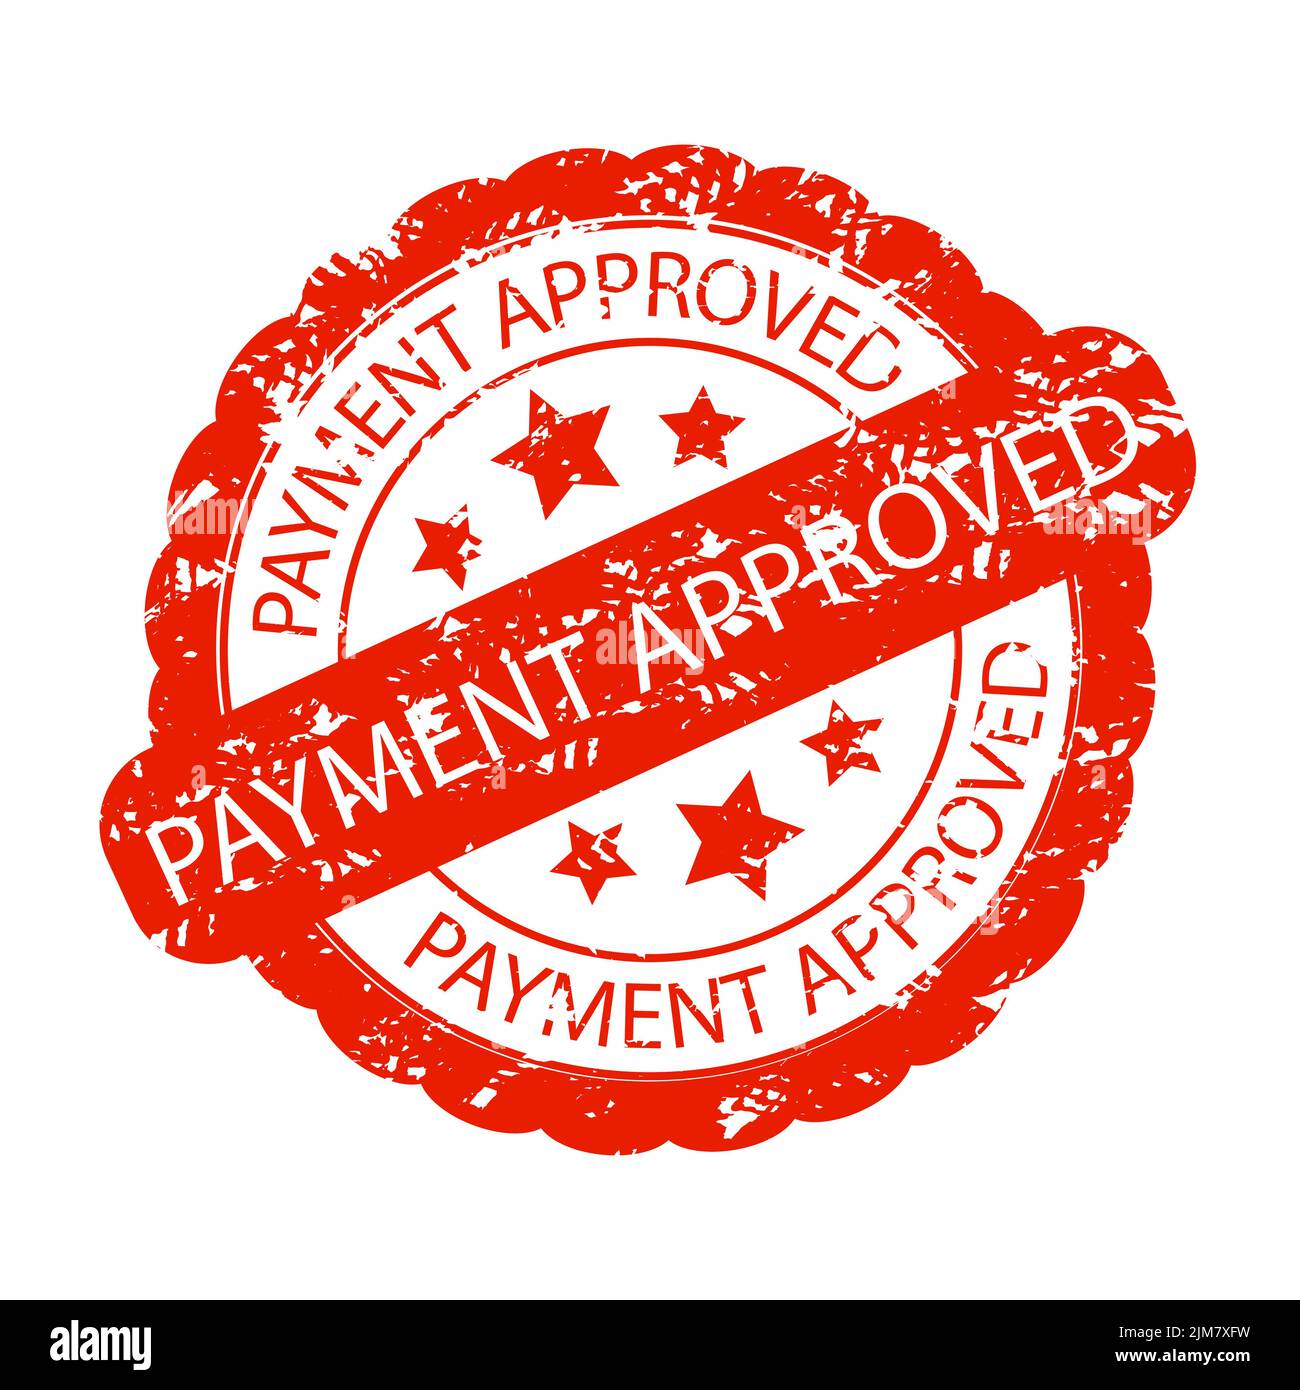 Payment approved rubber stamp for invoice and check. Vector of stamp payment, business sign rubber seal approval isolated icon, red ink agreement illu Stock Photo